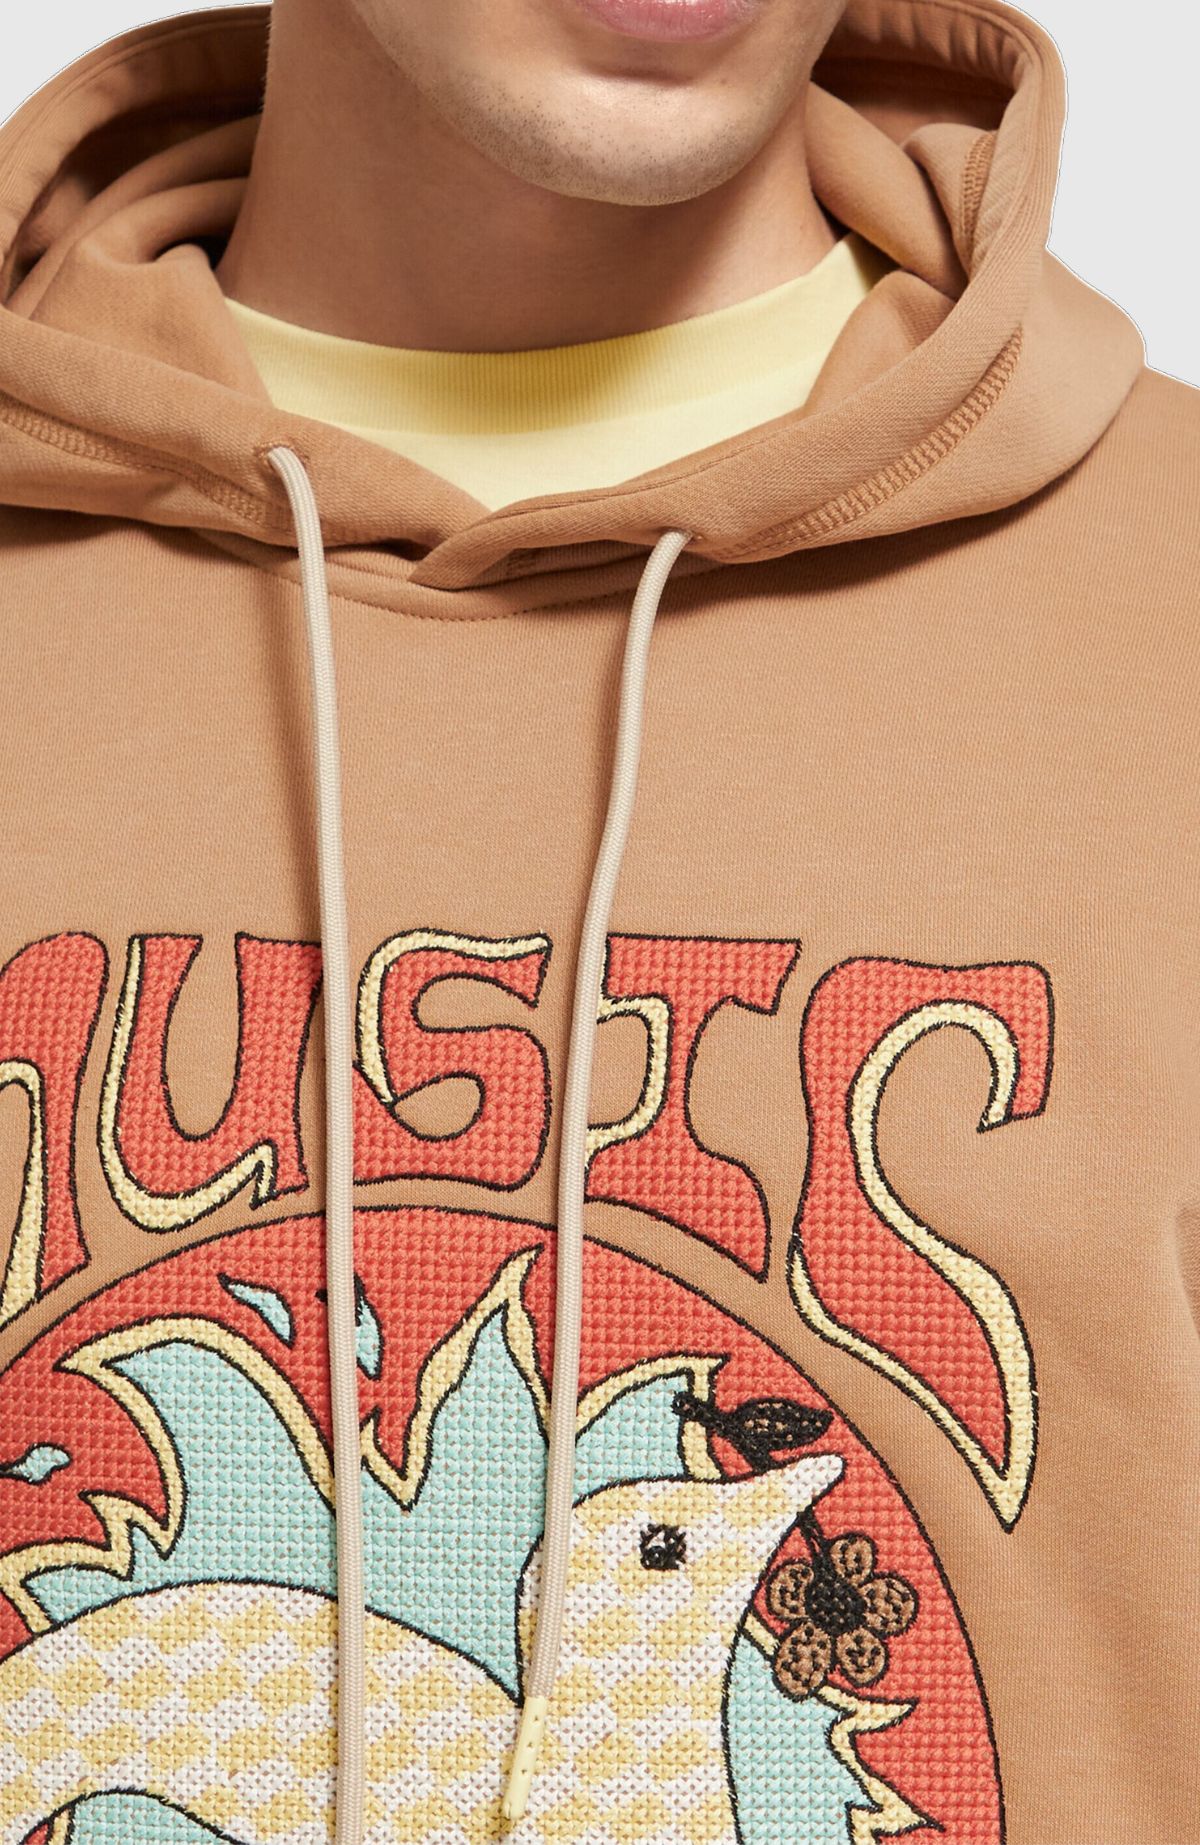 Relaxed fit artwork hoodie in Organic Cotton